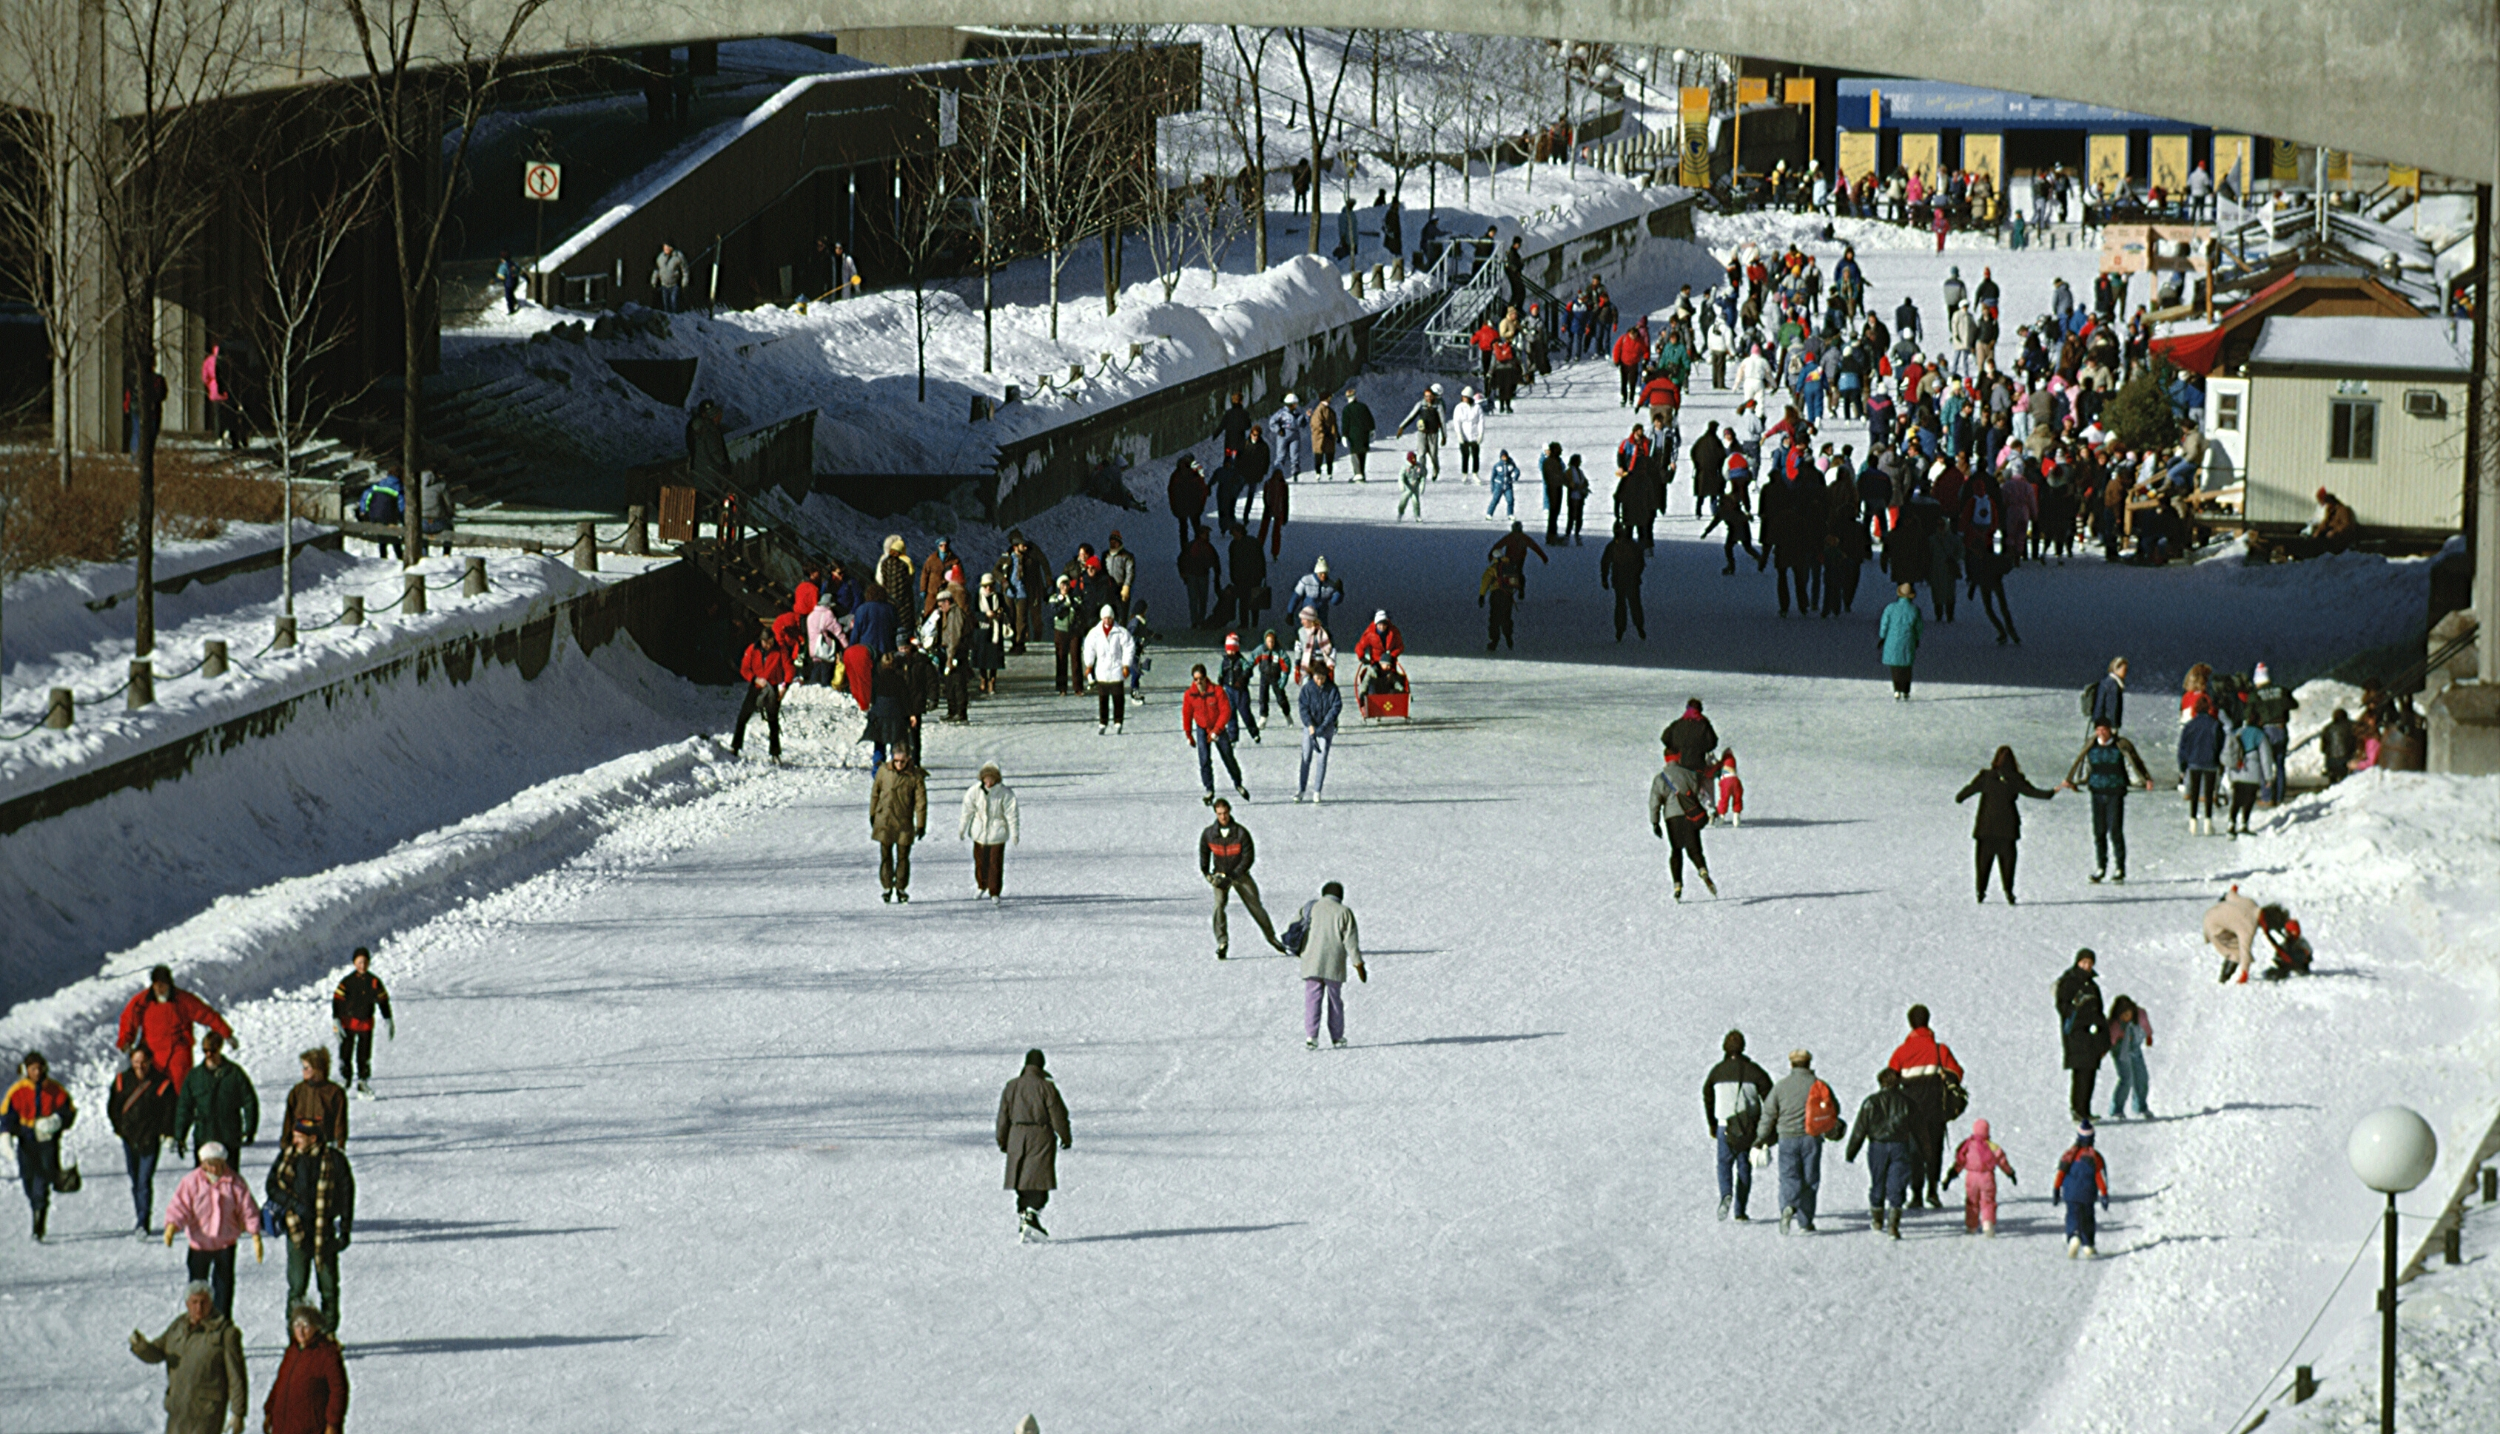 People ice skating at Rideau Canal Skateway in Ottawa Canada